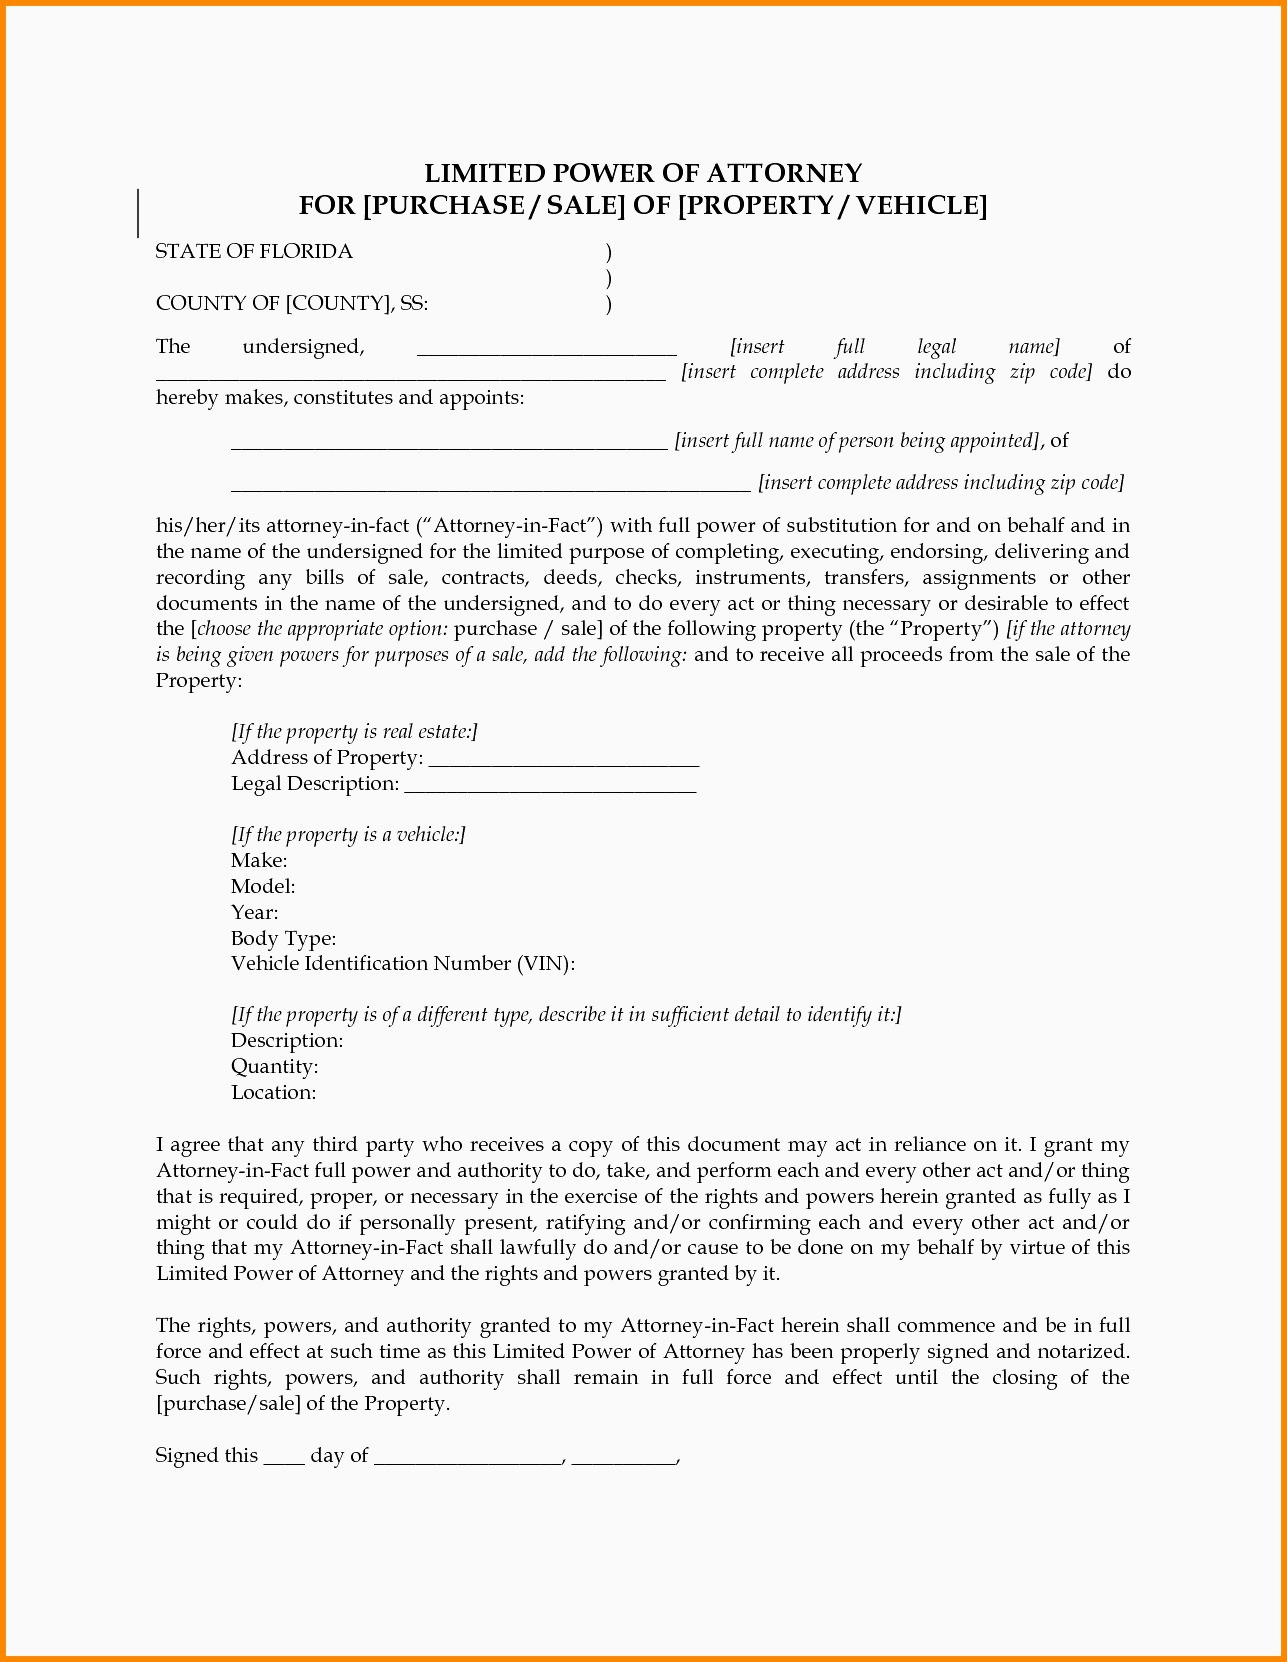 Mississippi Real Estate Purchase Agreement Best Of Dmv Power Document Attorney Form Florida